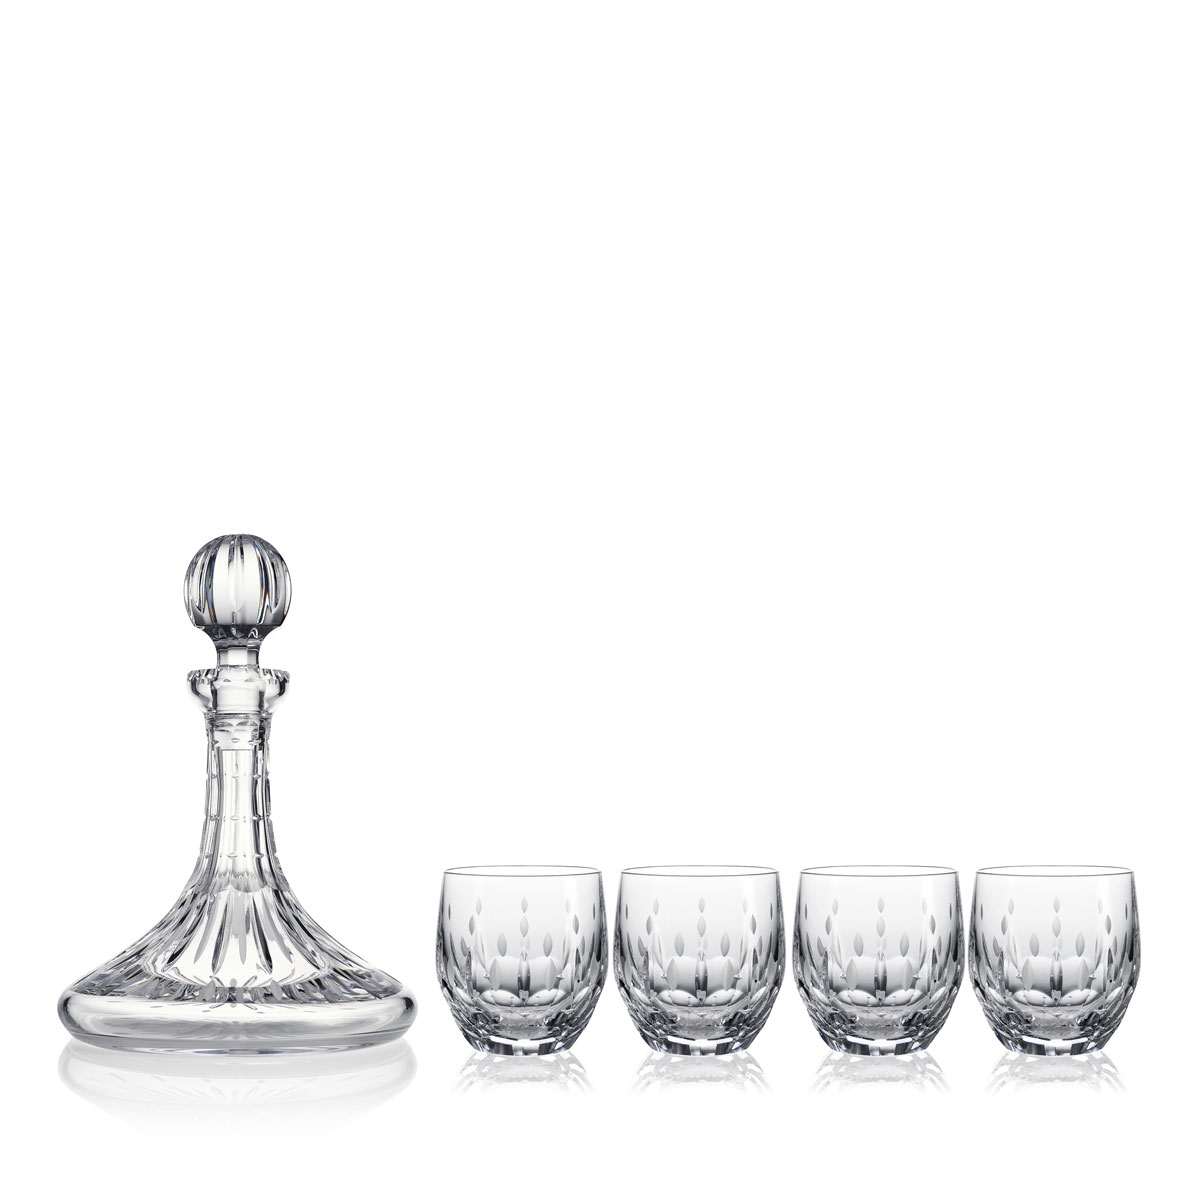 Waterford Crystal Mastercraft Winter Wonders Decanter and Tumbler Set of 4